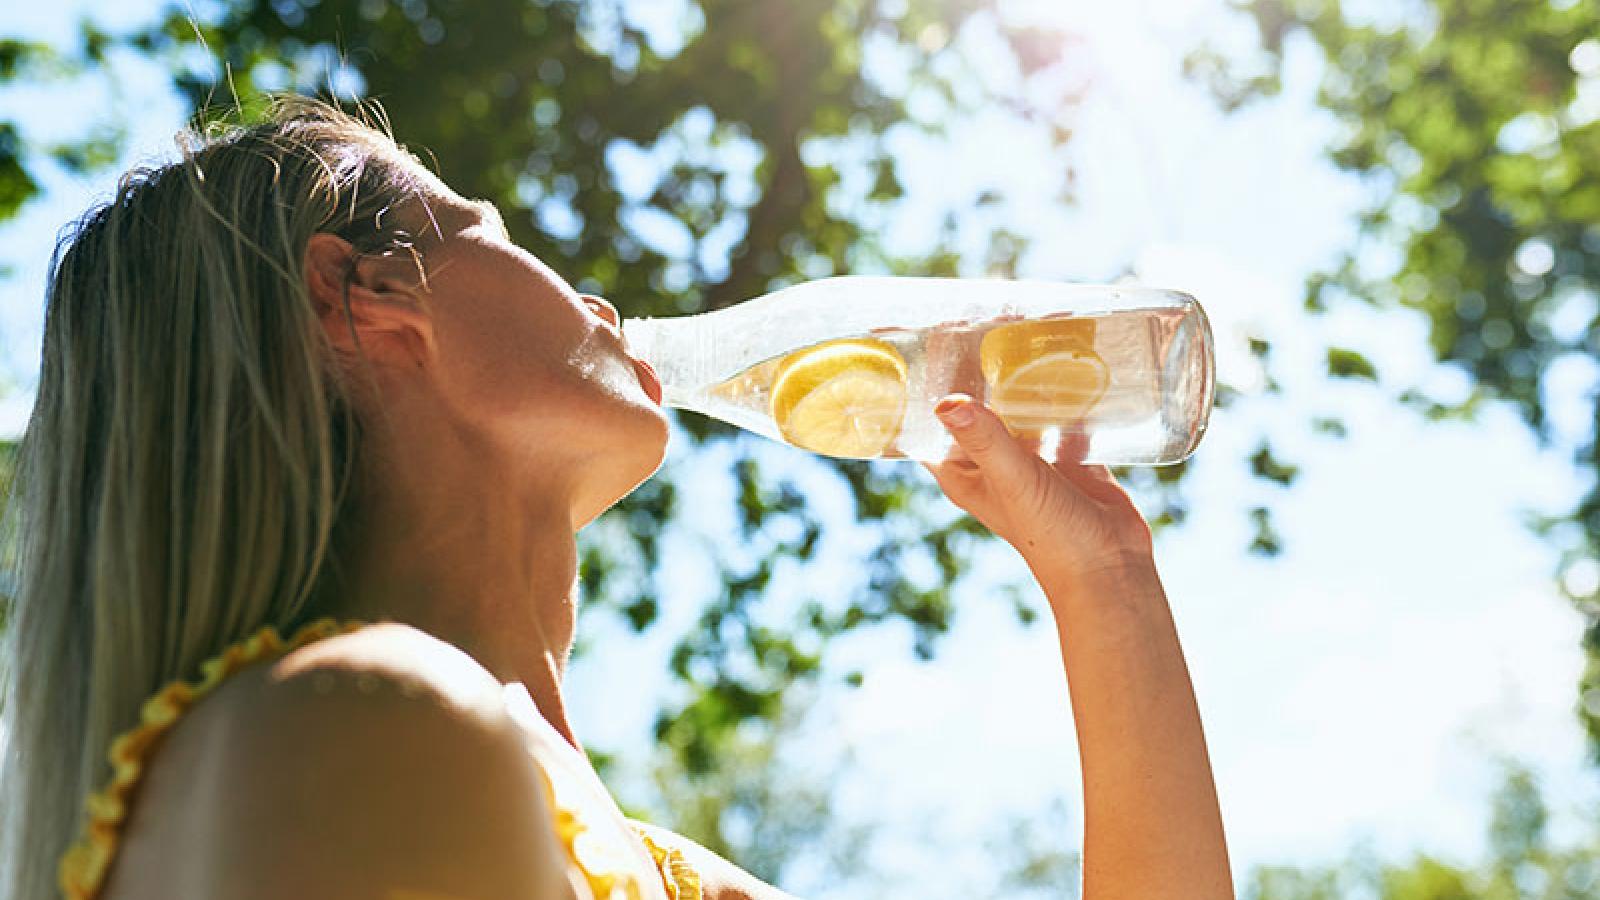 4 Easy Ways to Stay Hydrated This Summer